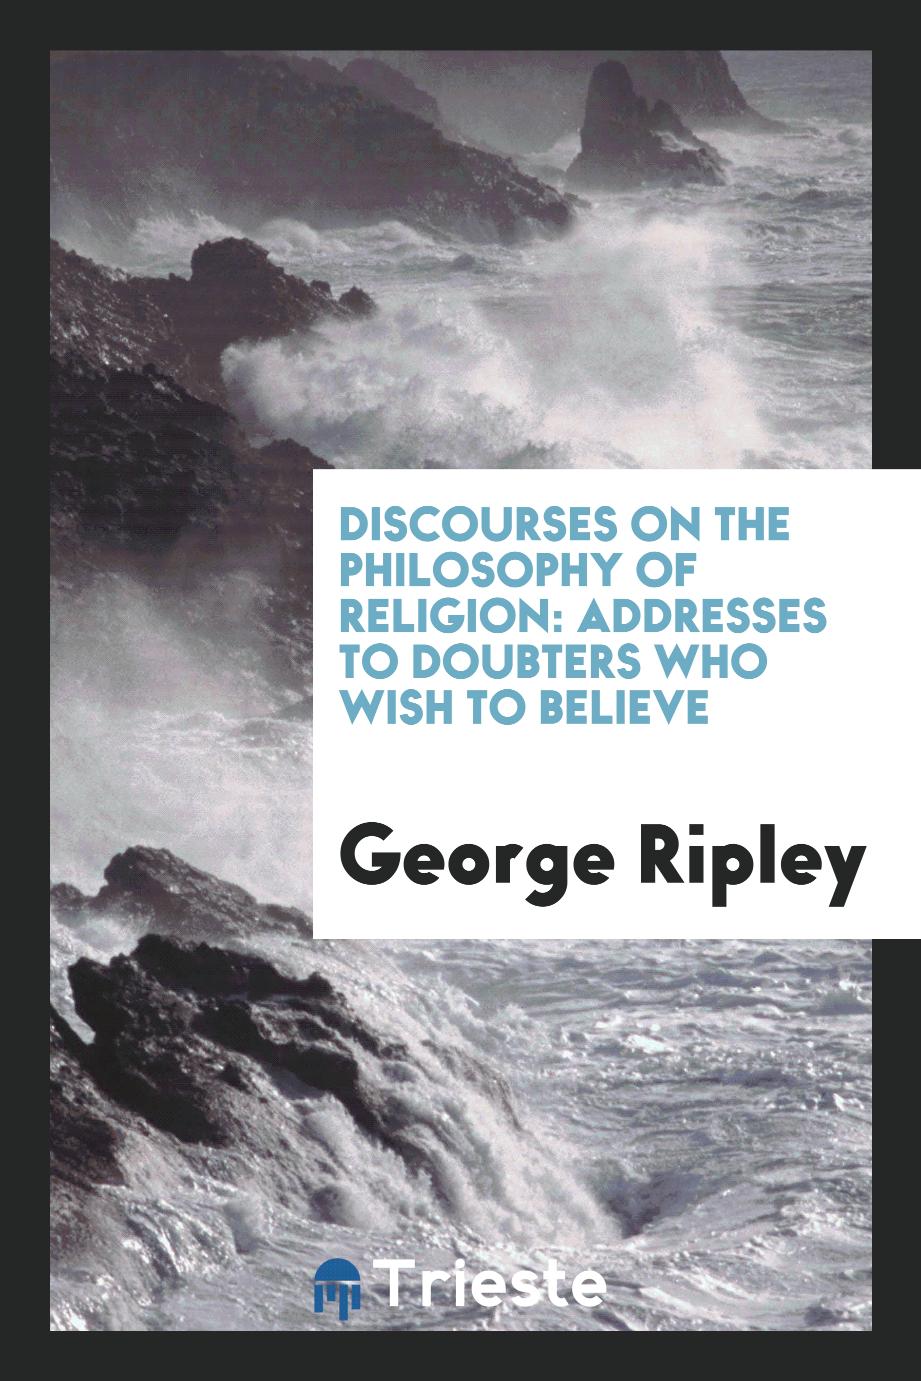 Discourses on the Philosophy of Religion: Addresses to Doubters who Wish to believe